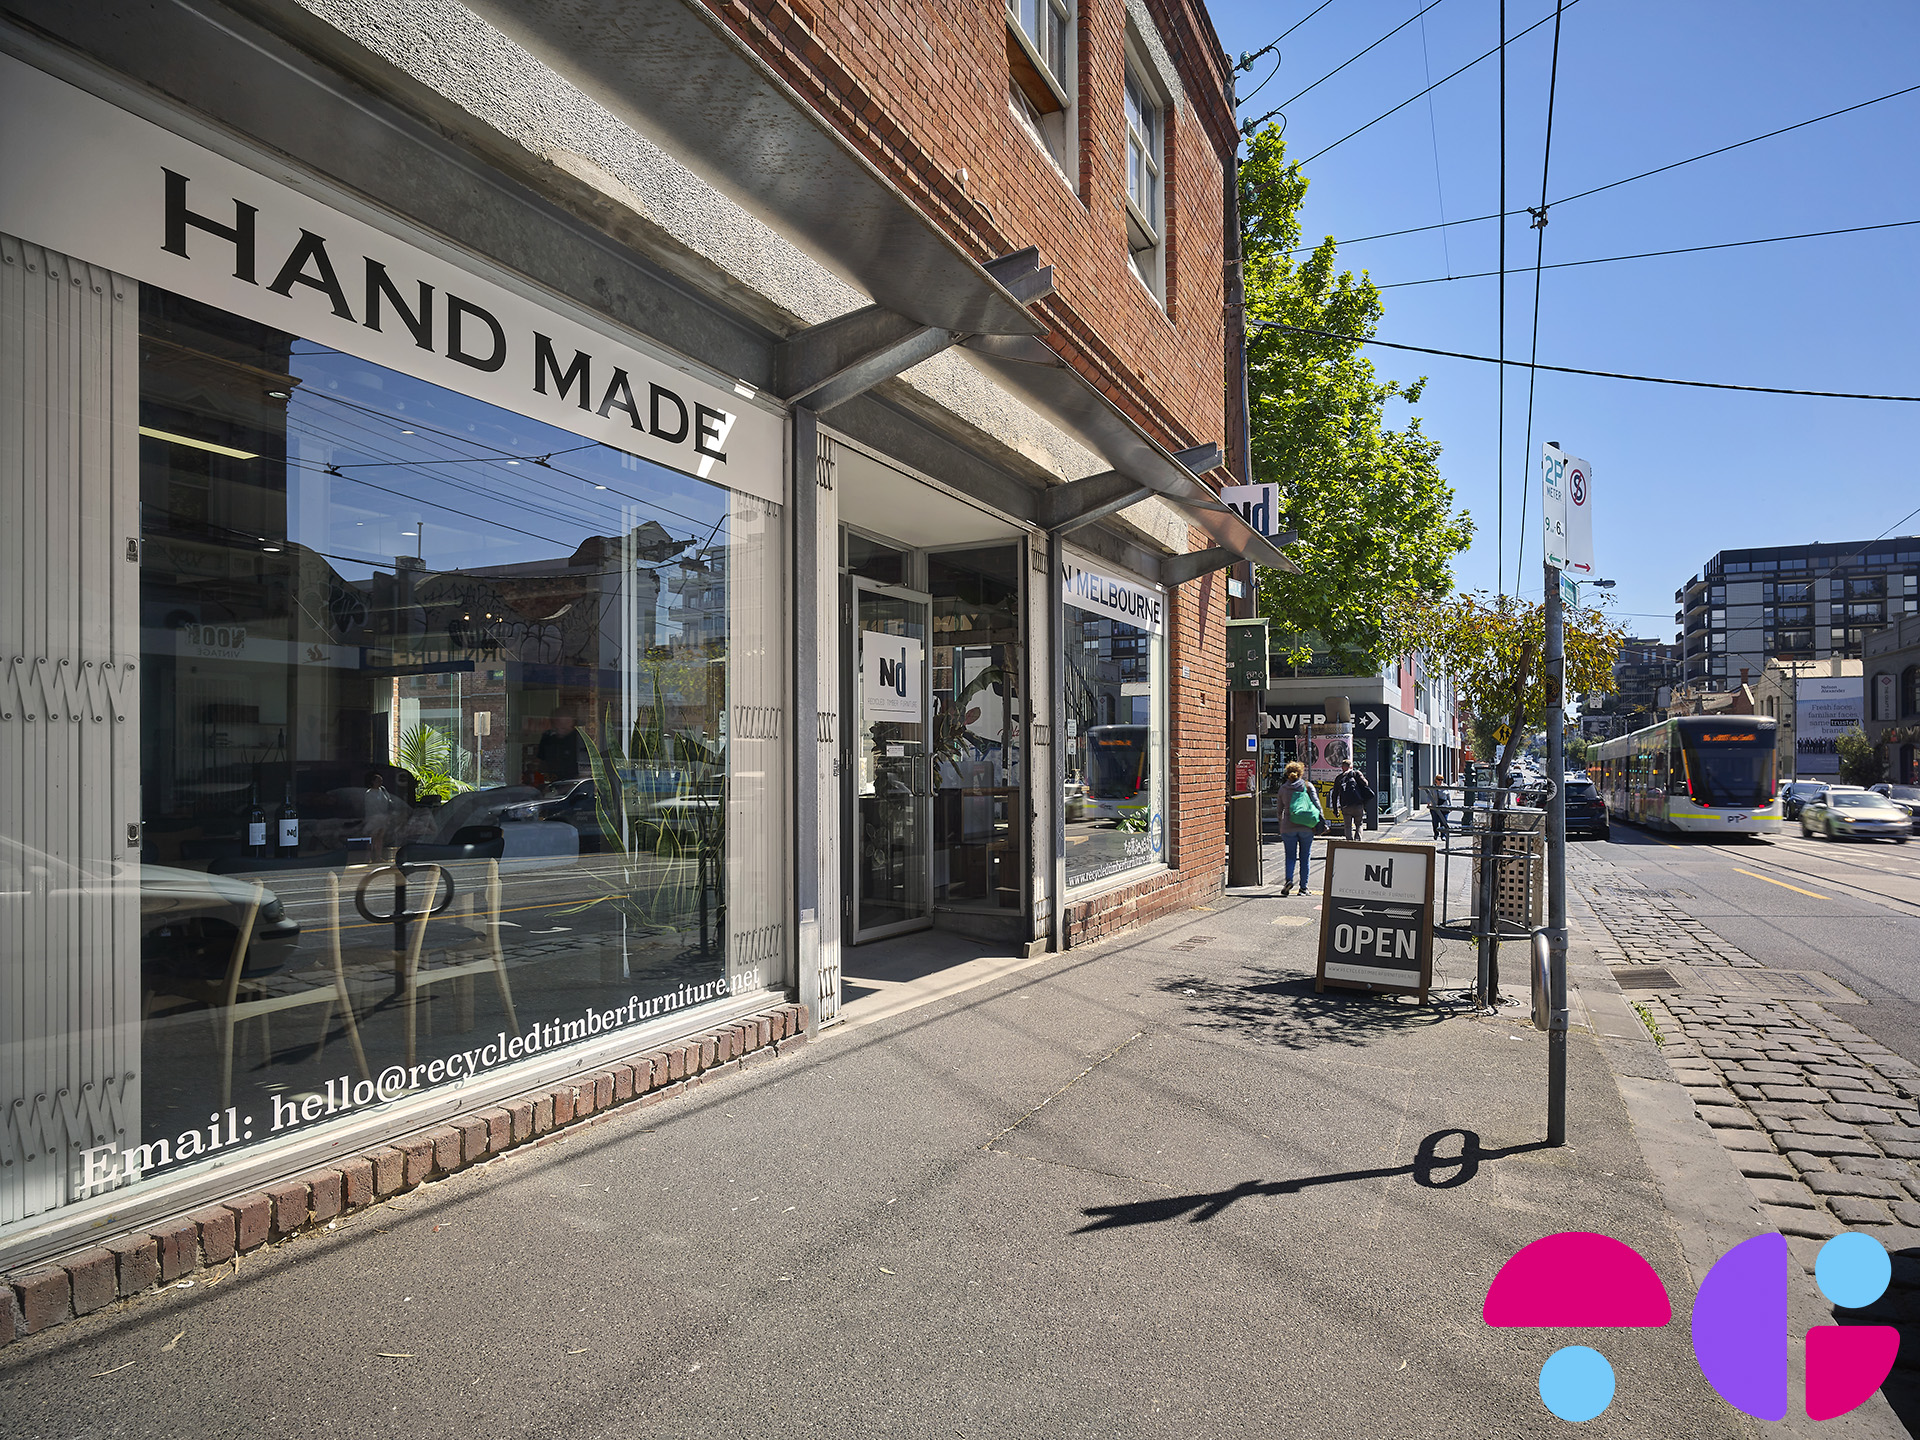 TCI 393 Smith Street Fitzroy Lease Leased